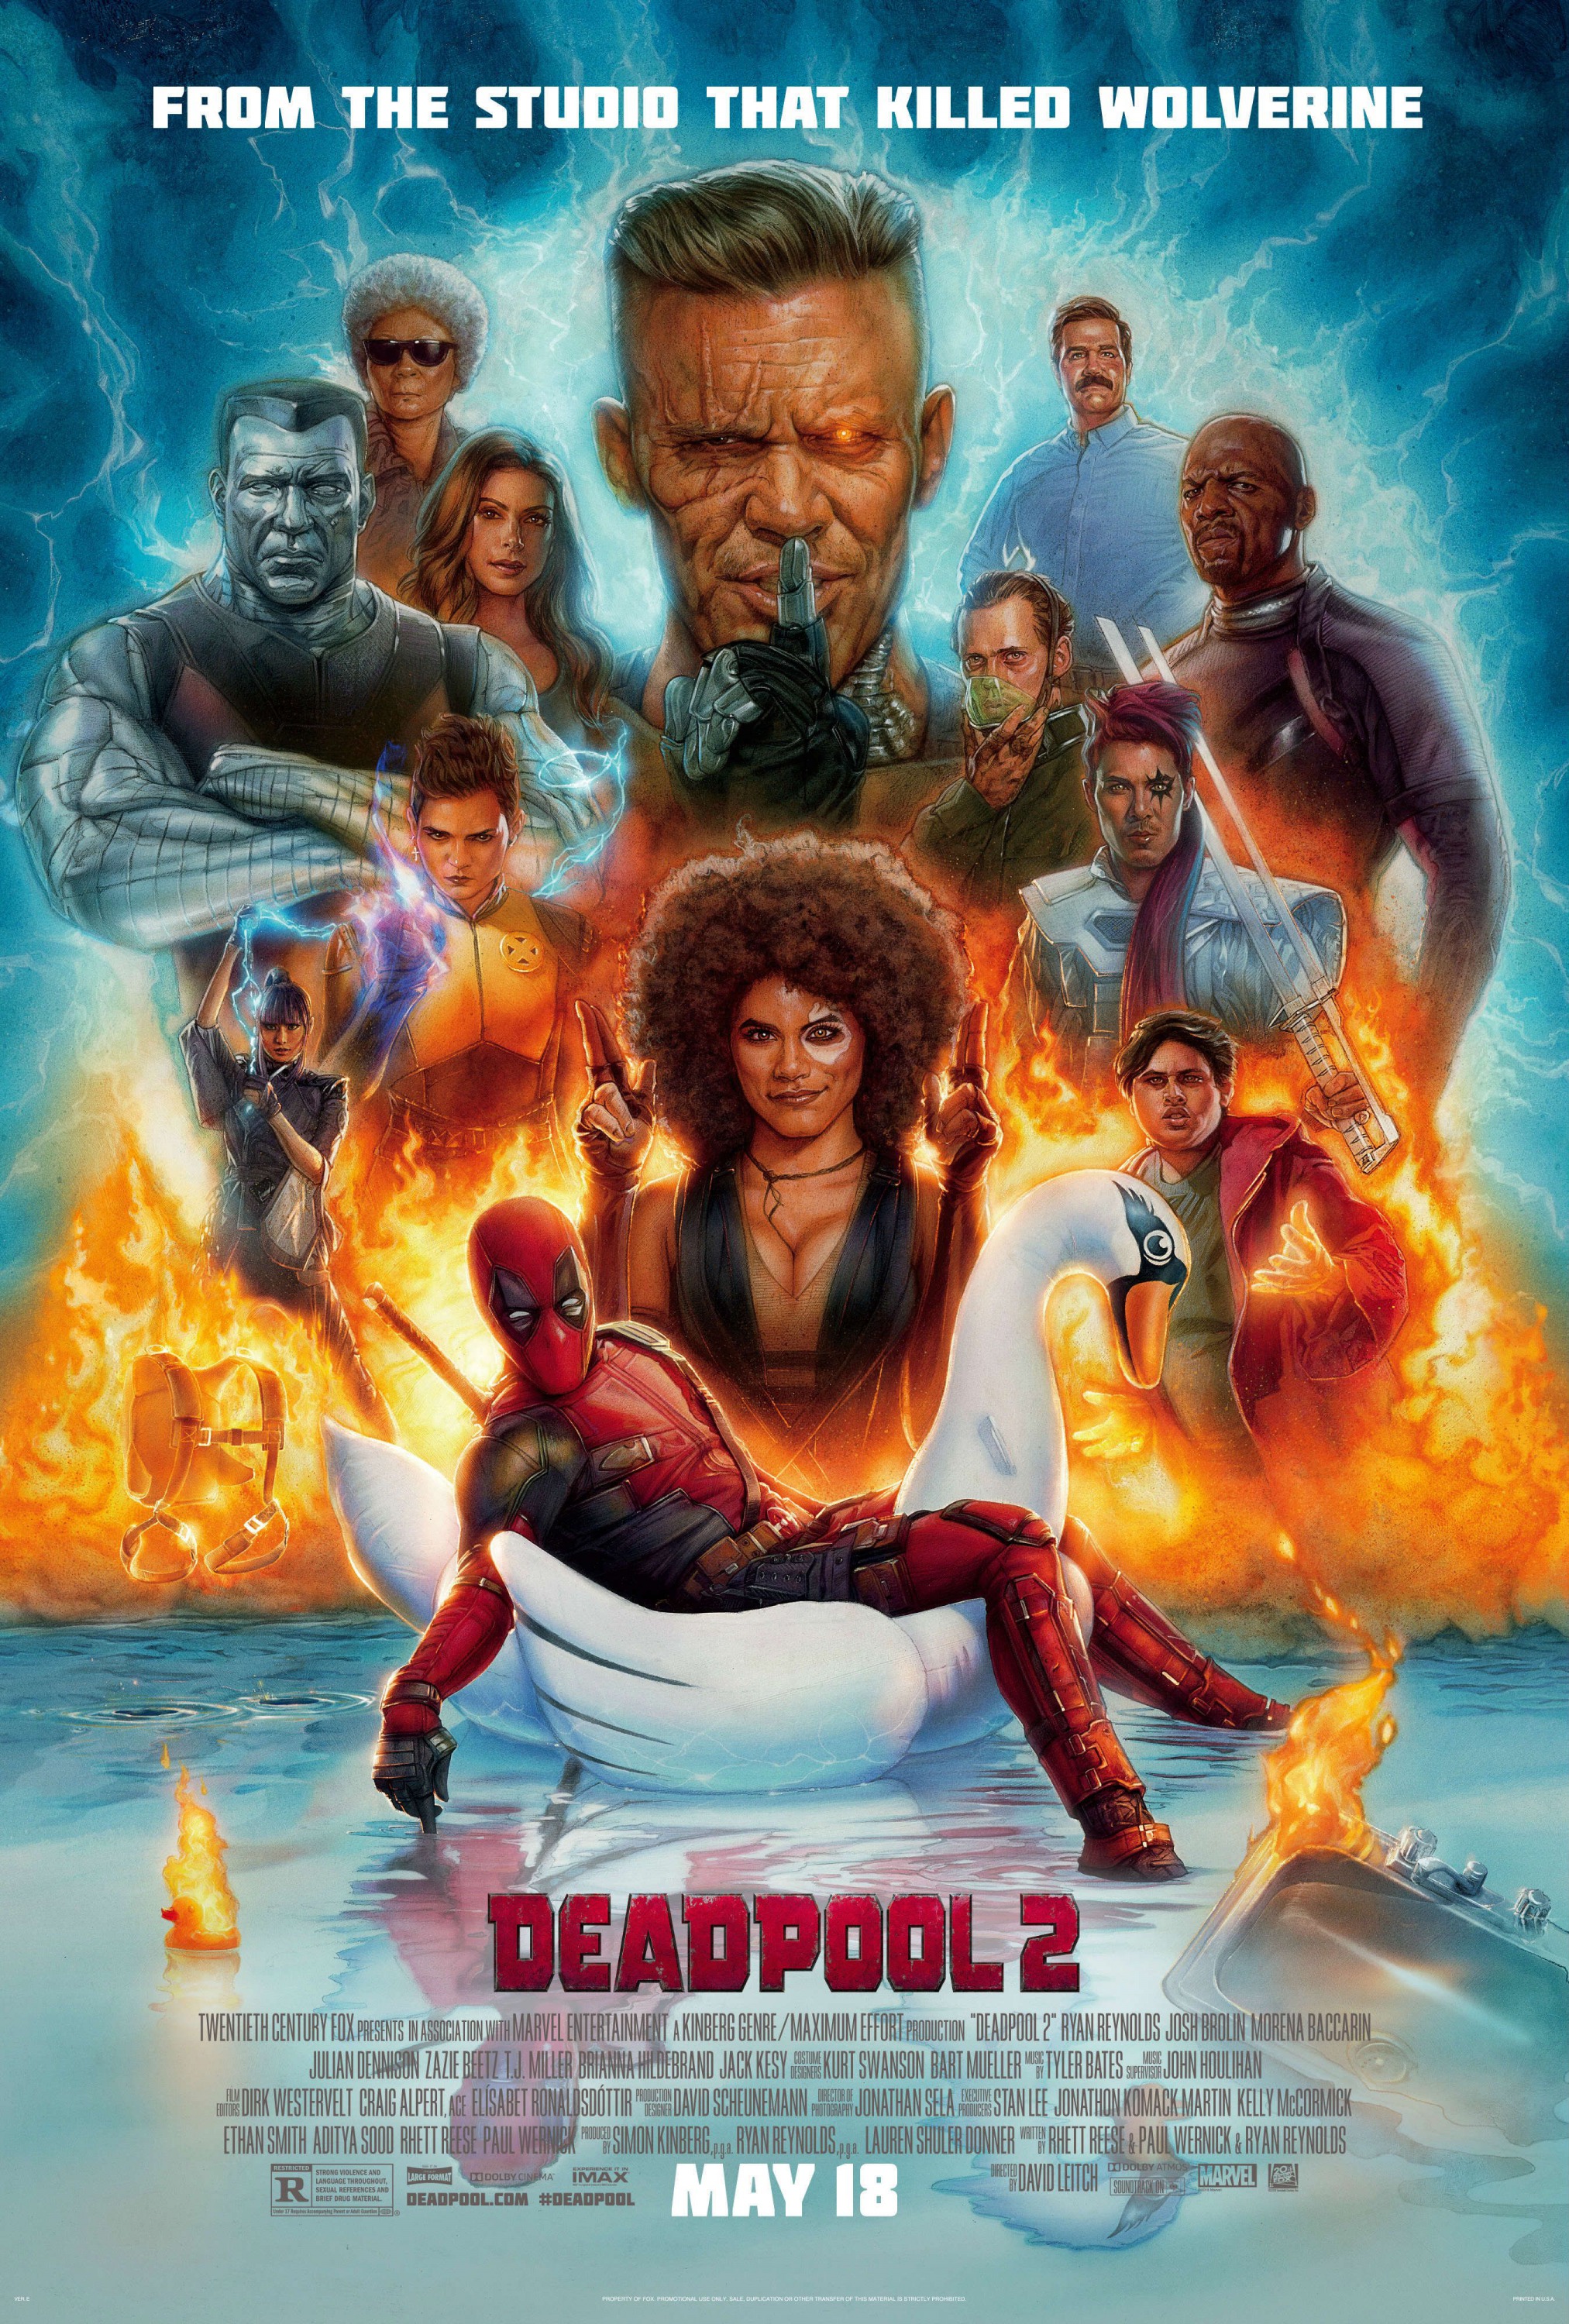 Deadpool 2 new art poster is still not over Wolverine | SciFiNow - The